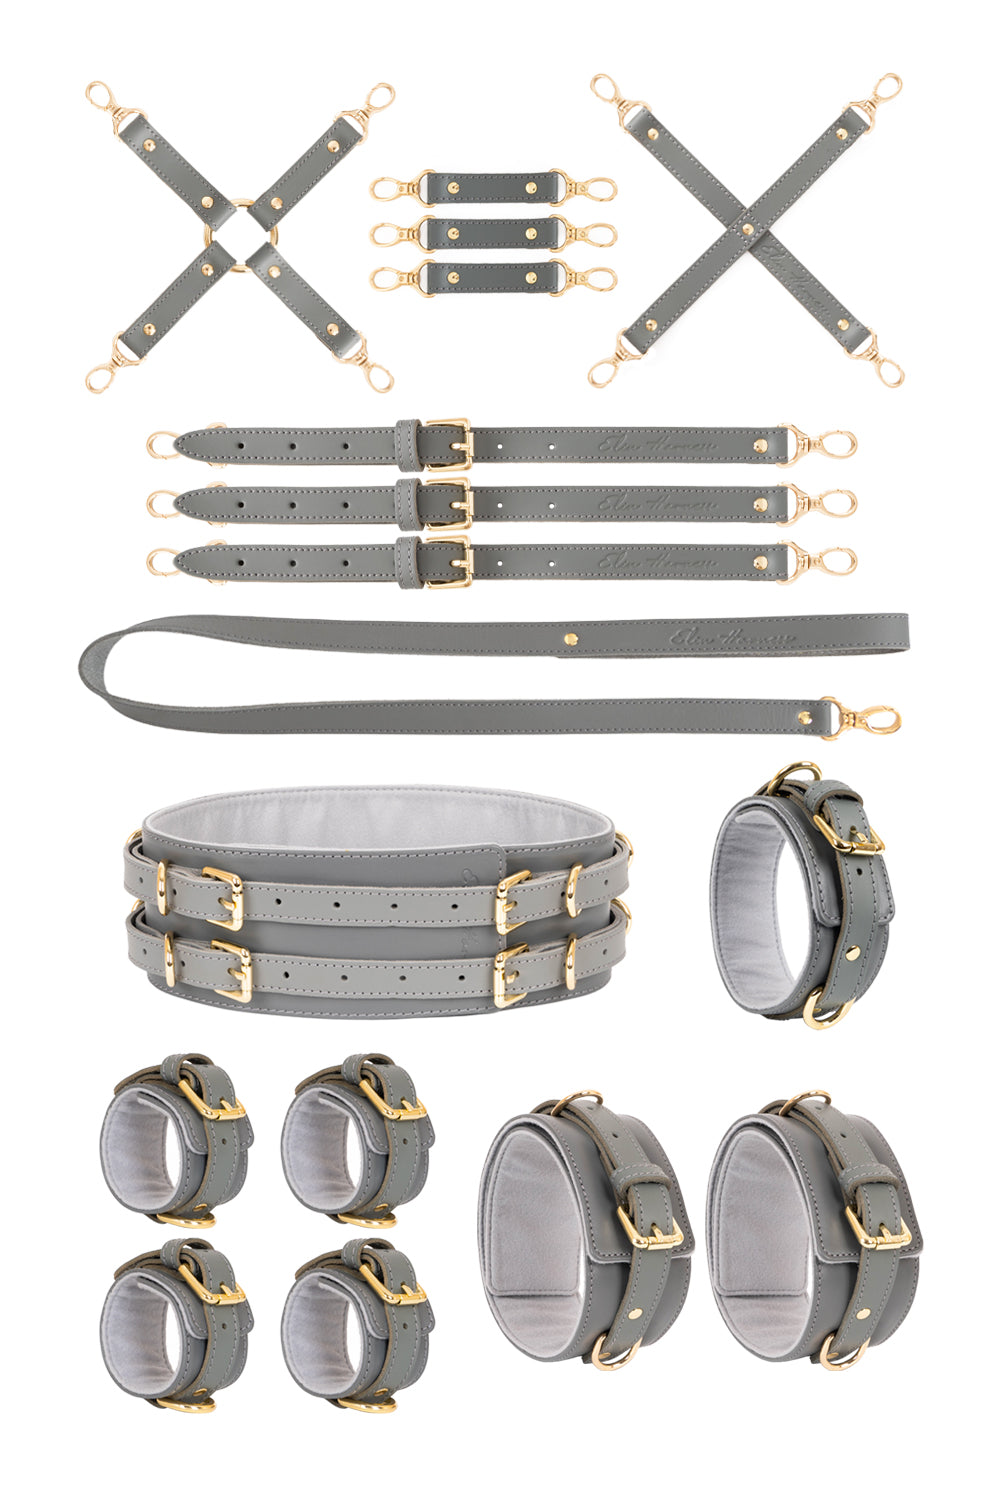 7 in 1 Leather Harness Bondage Set. 10 colors